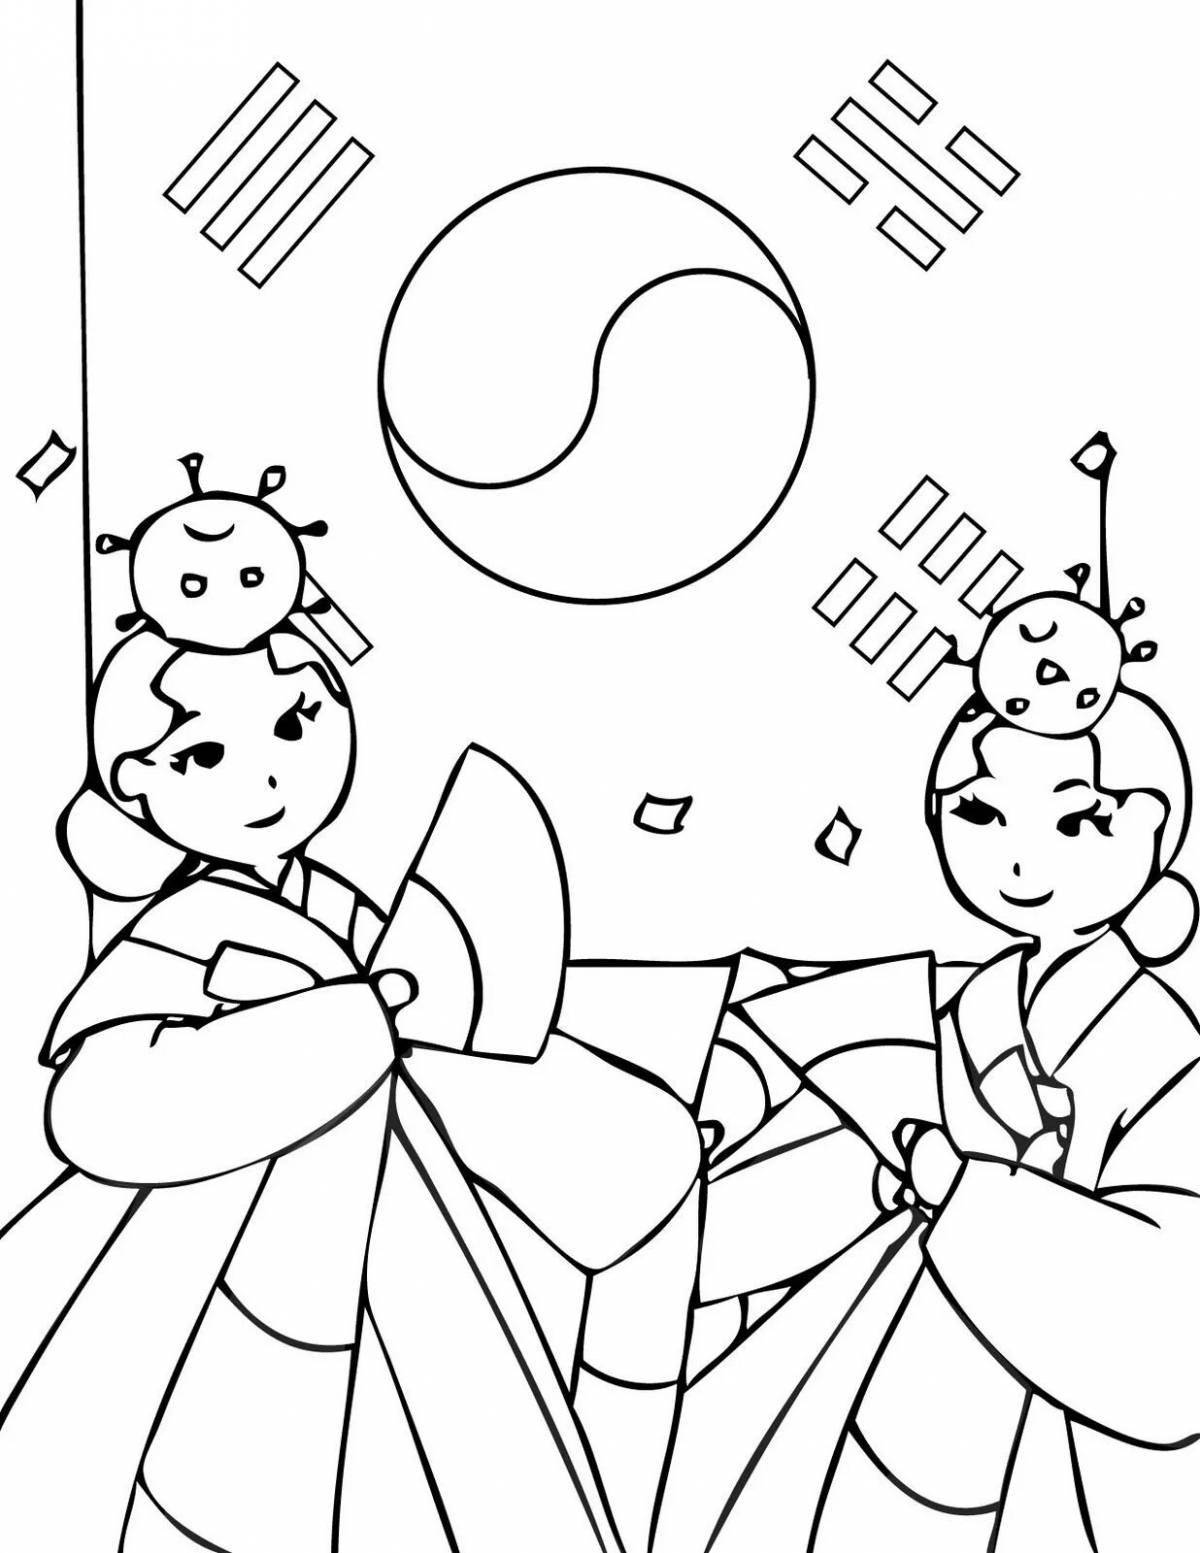 South Korea glowing flag coloring page